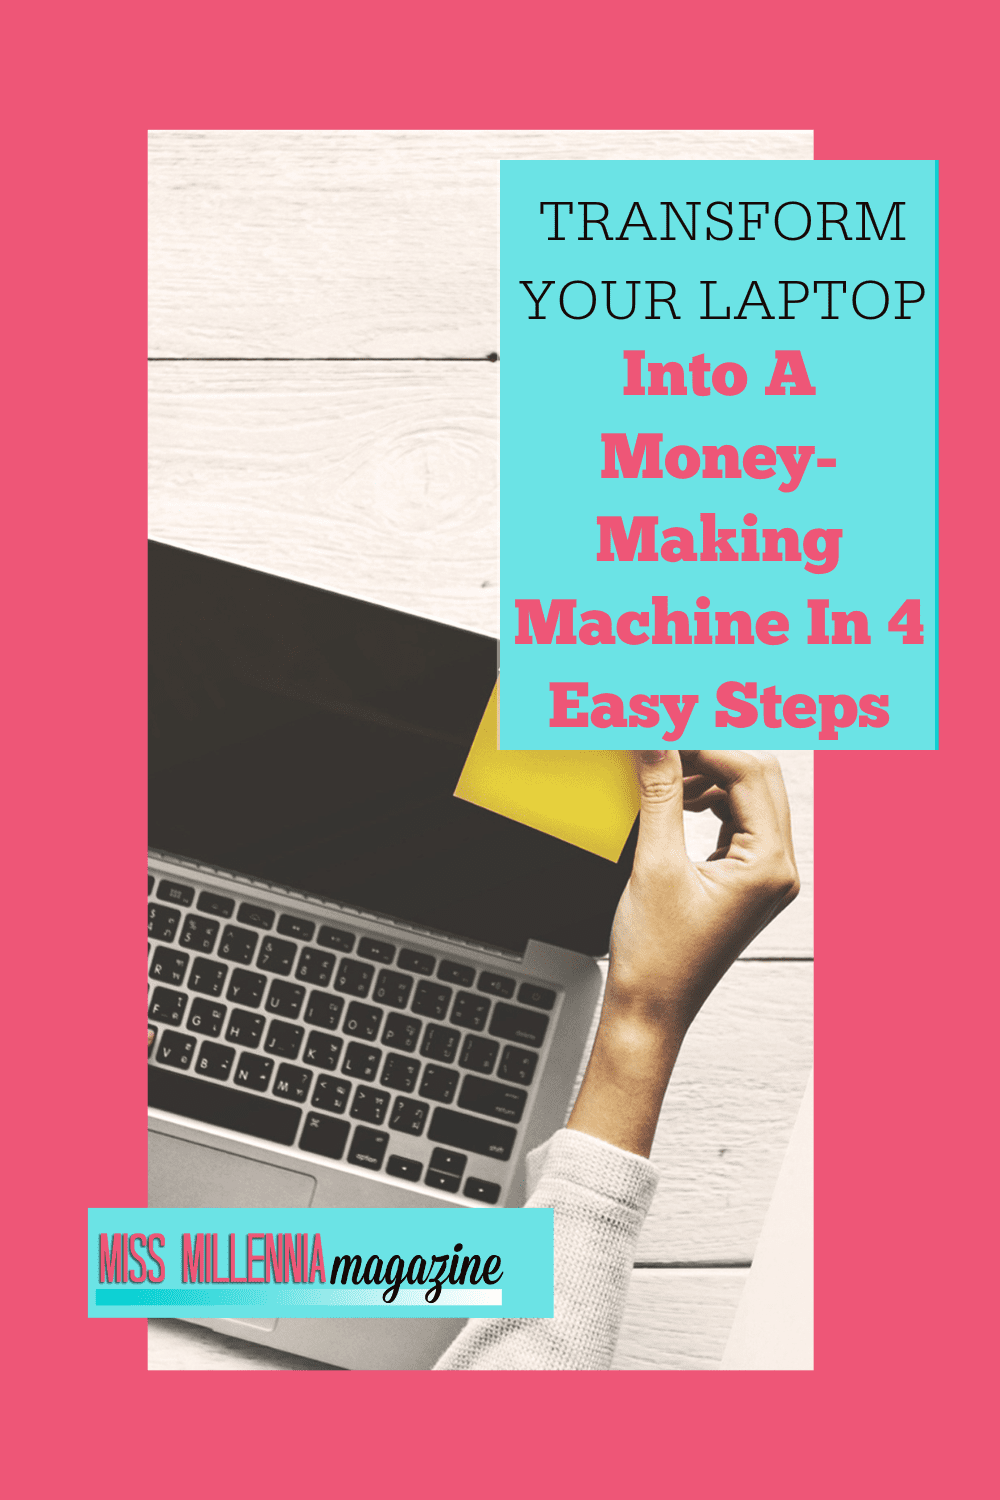 Transform Your Laptop Into A Money-Making Machine In 4 Easy Steps